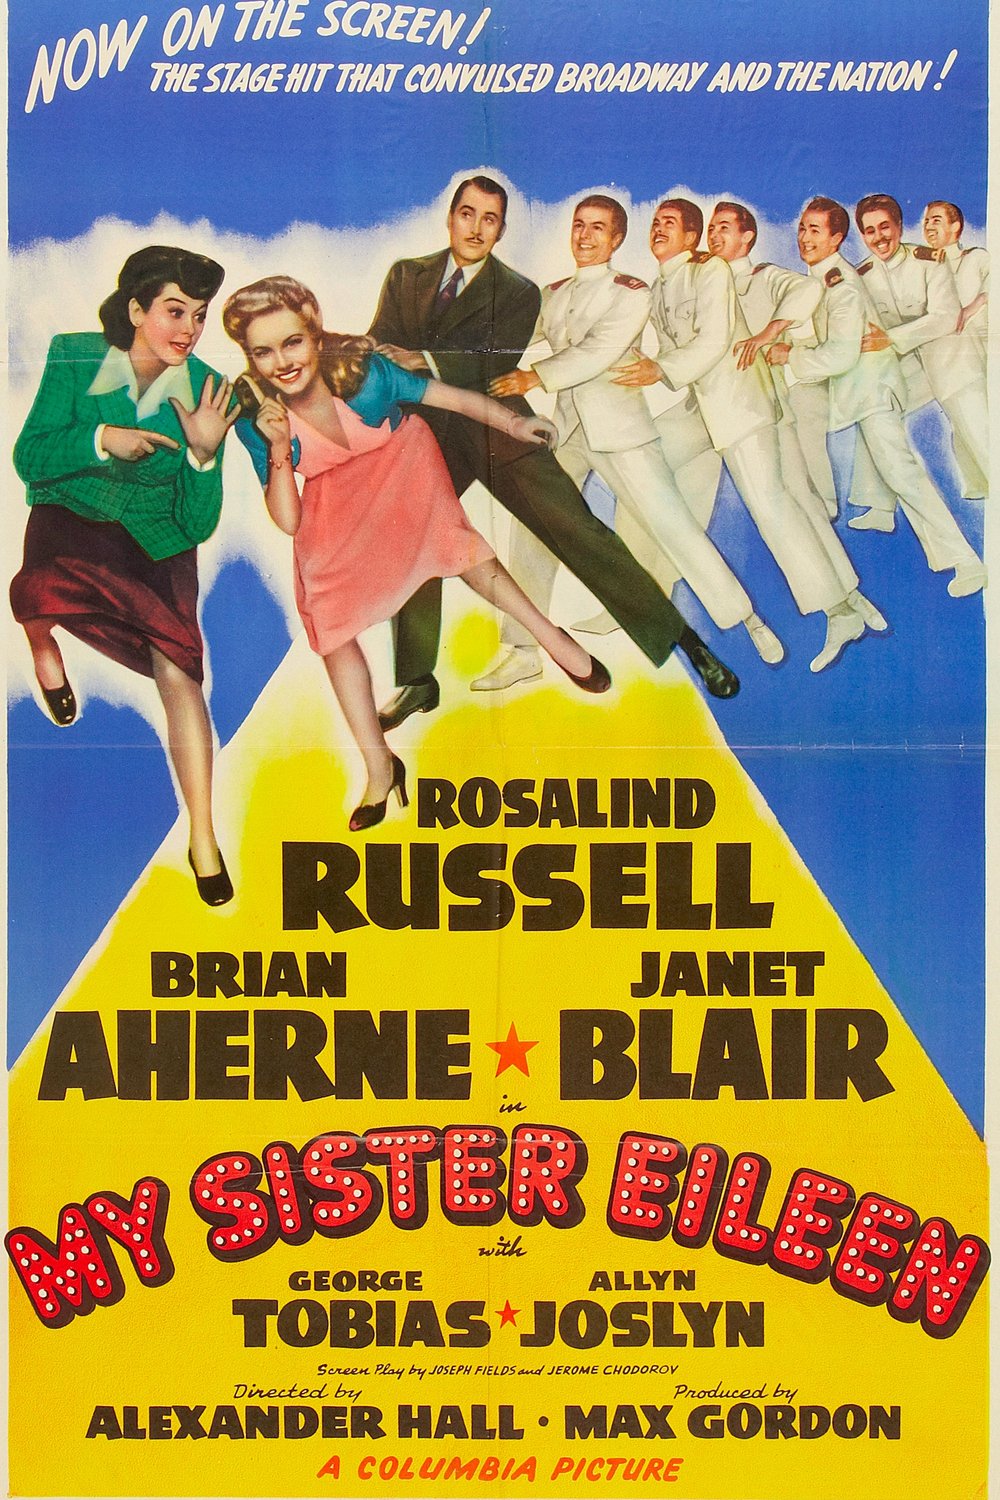 Poster of the movie My Sister Eileen